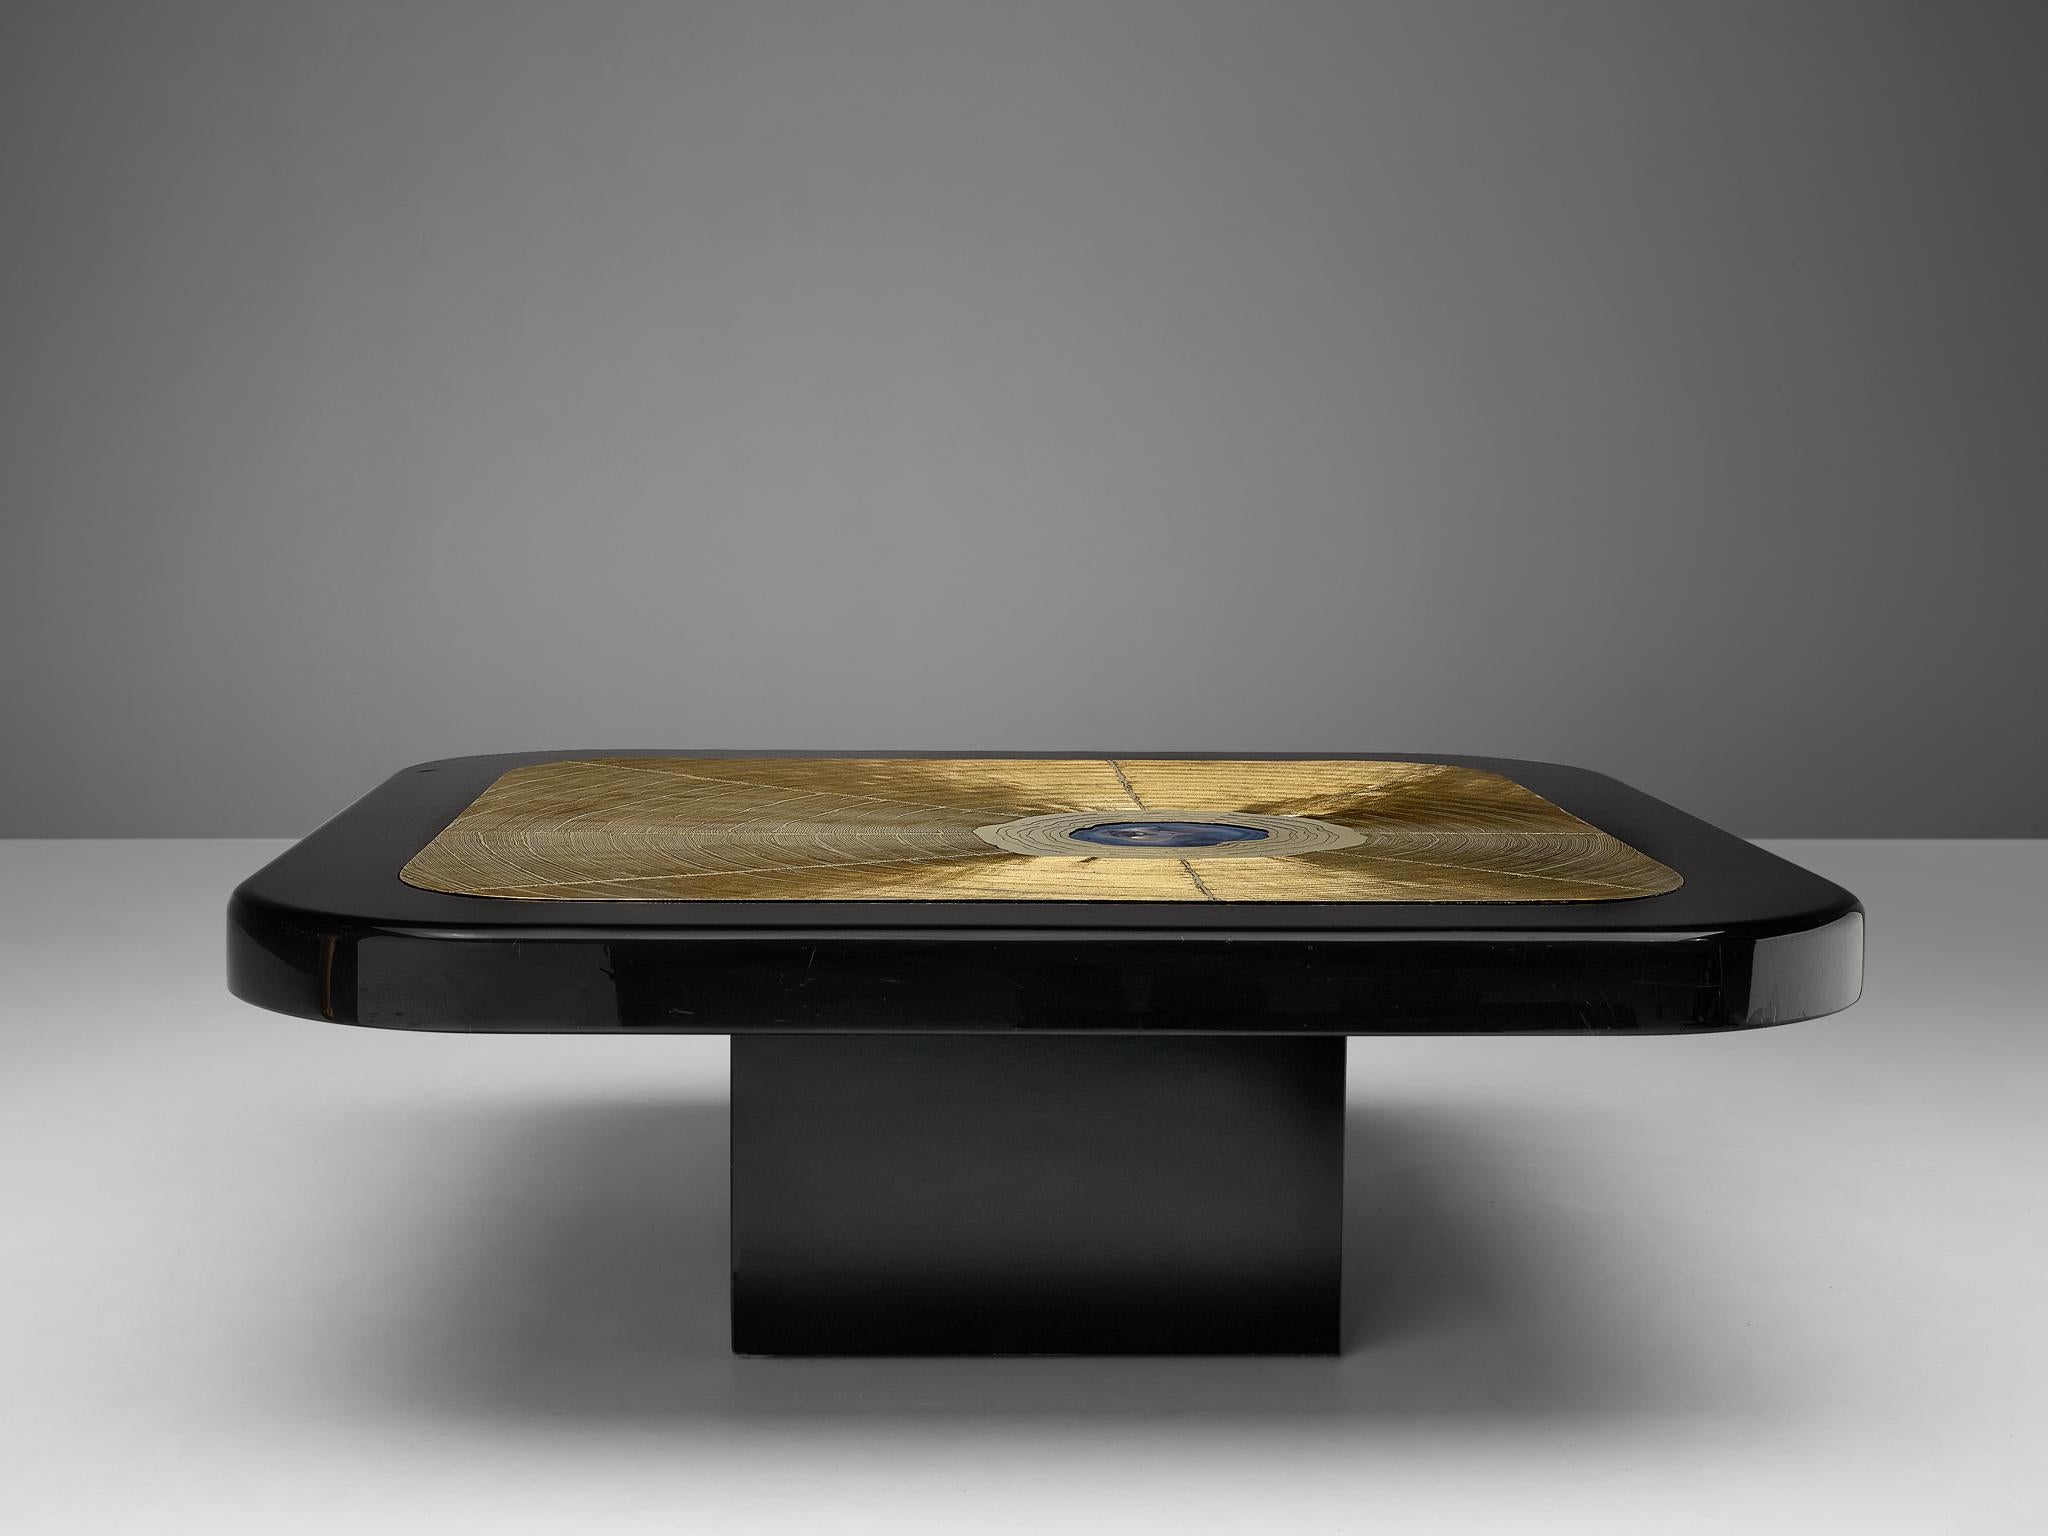 Metal Lova Creation Etched Brass Coffee Table with Agate Stone Inlay